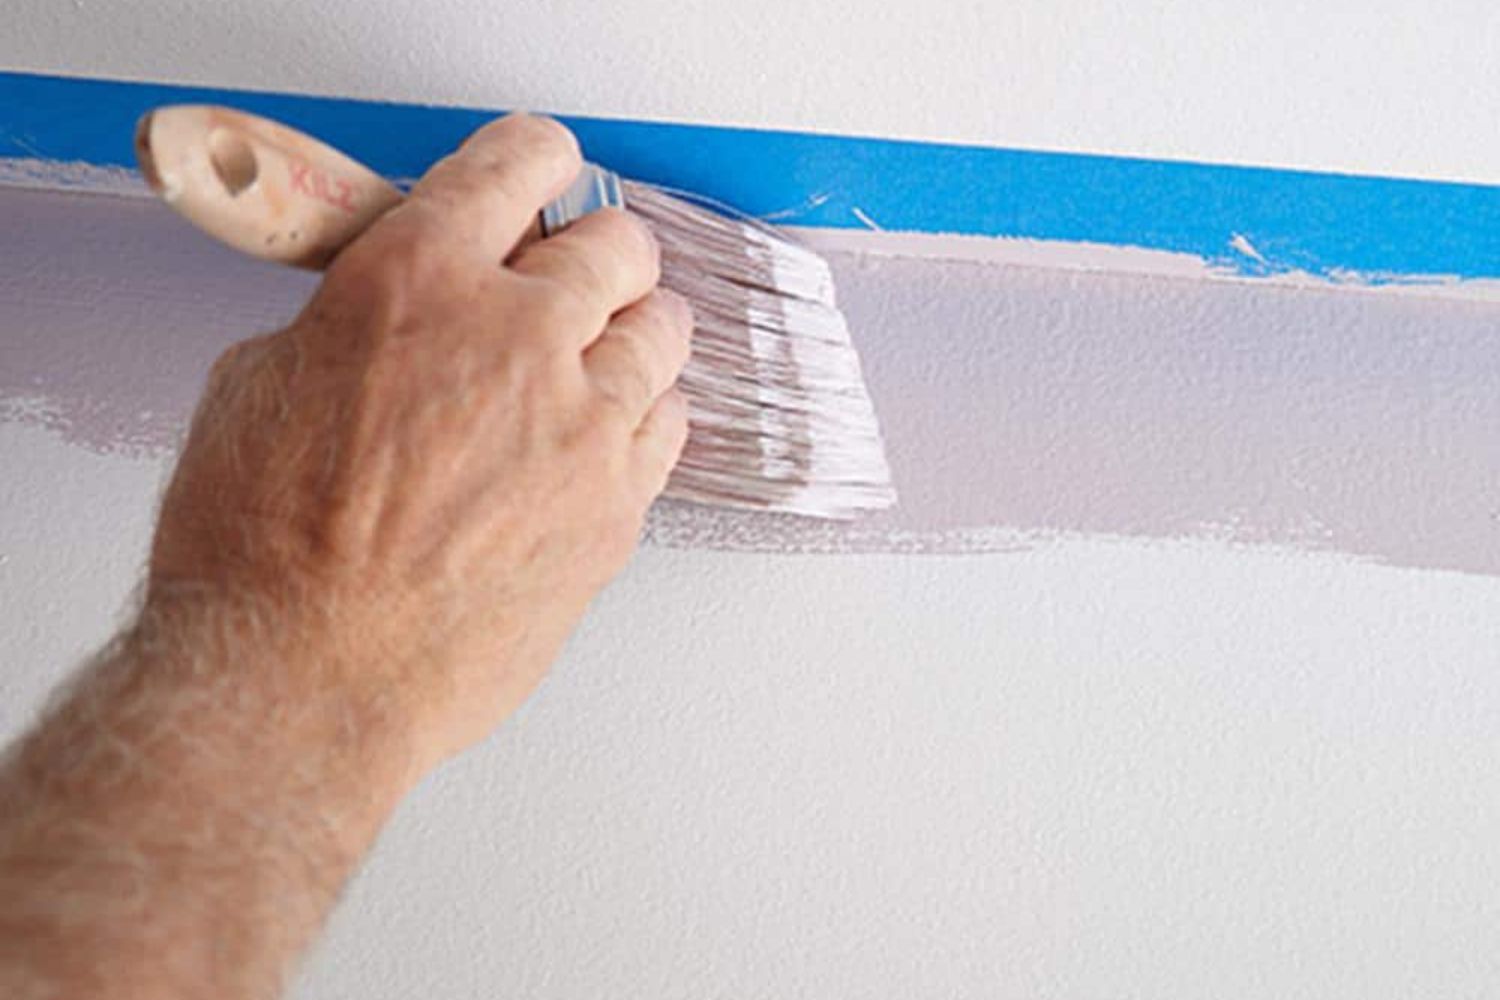 A person running a paint brush along a piece of painter's tape to add color to a wall using the best-VOC paint.